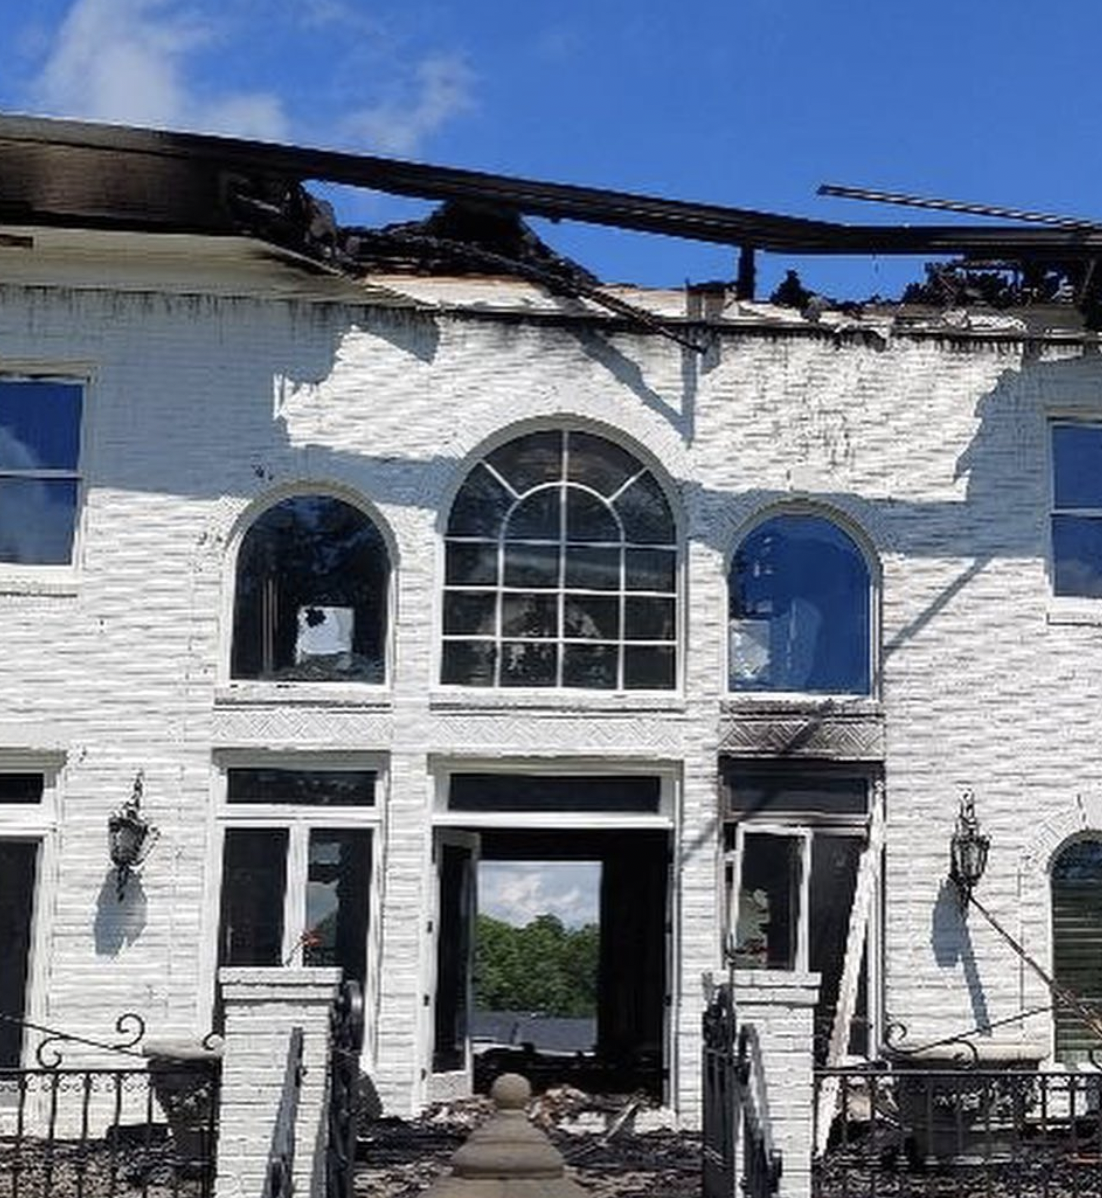 cursed zillow photo - fire damaged tennessee mansion - Smaranthus